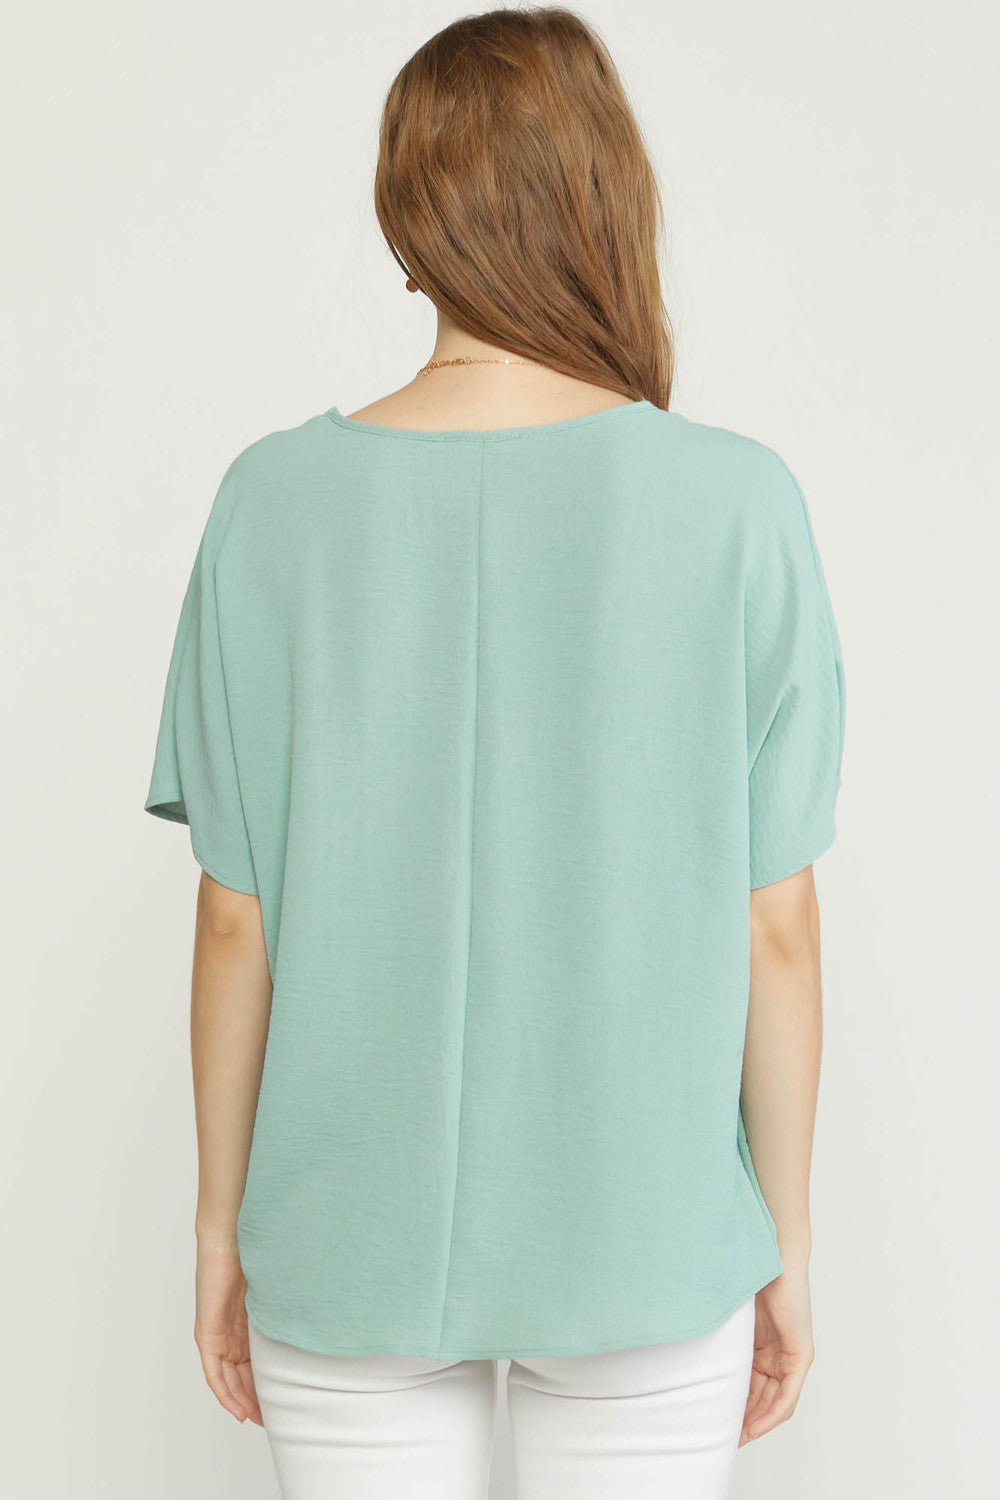 Long Sleeve Undershirts for Women Tops Tops Women's Sleeve Working V Neck  Blouse T Shirt Short Printing, Mint Green, Large : : Clothing,  Shoes & Accessories